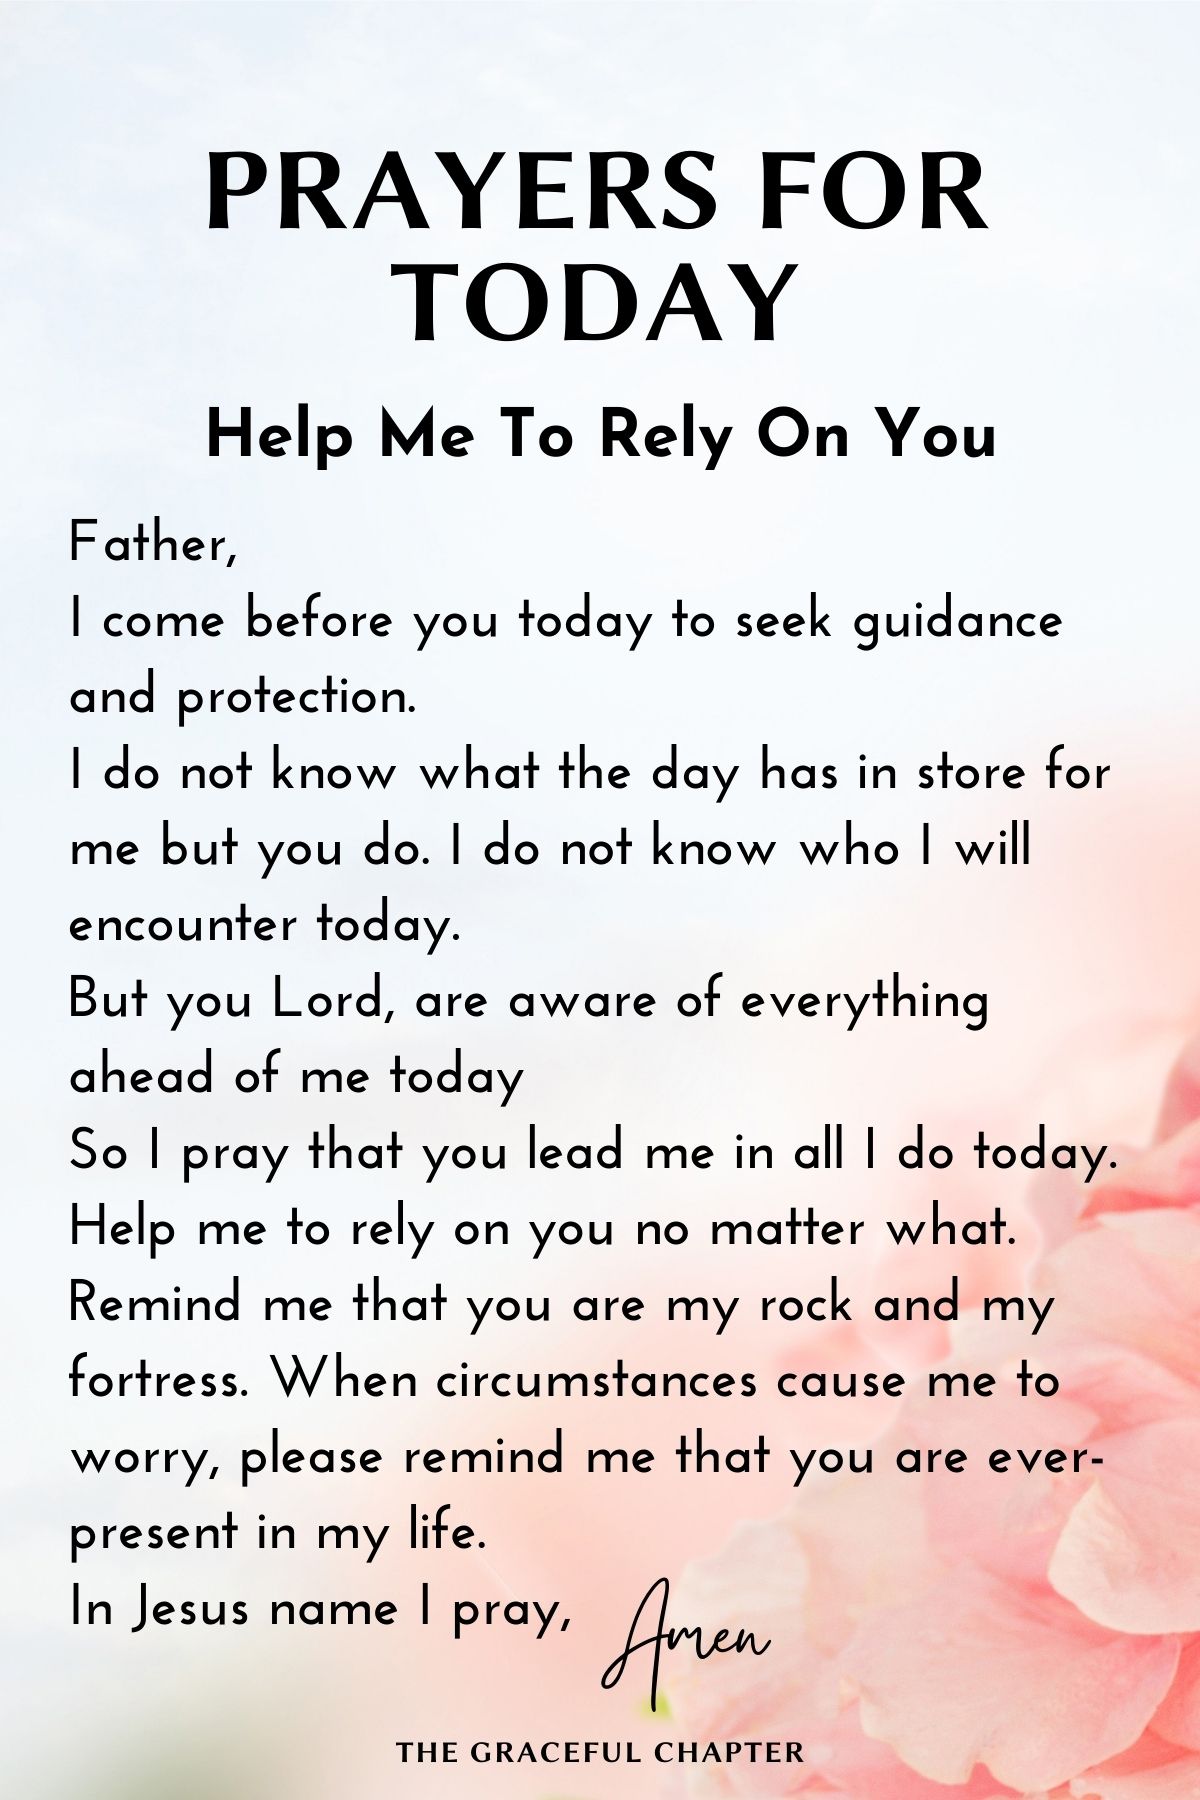 Prayers for today - Help me to rely on you